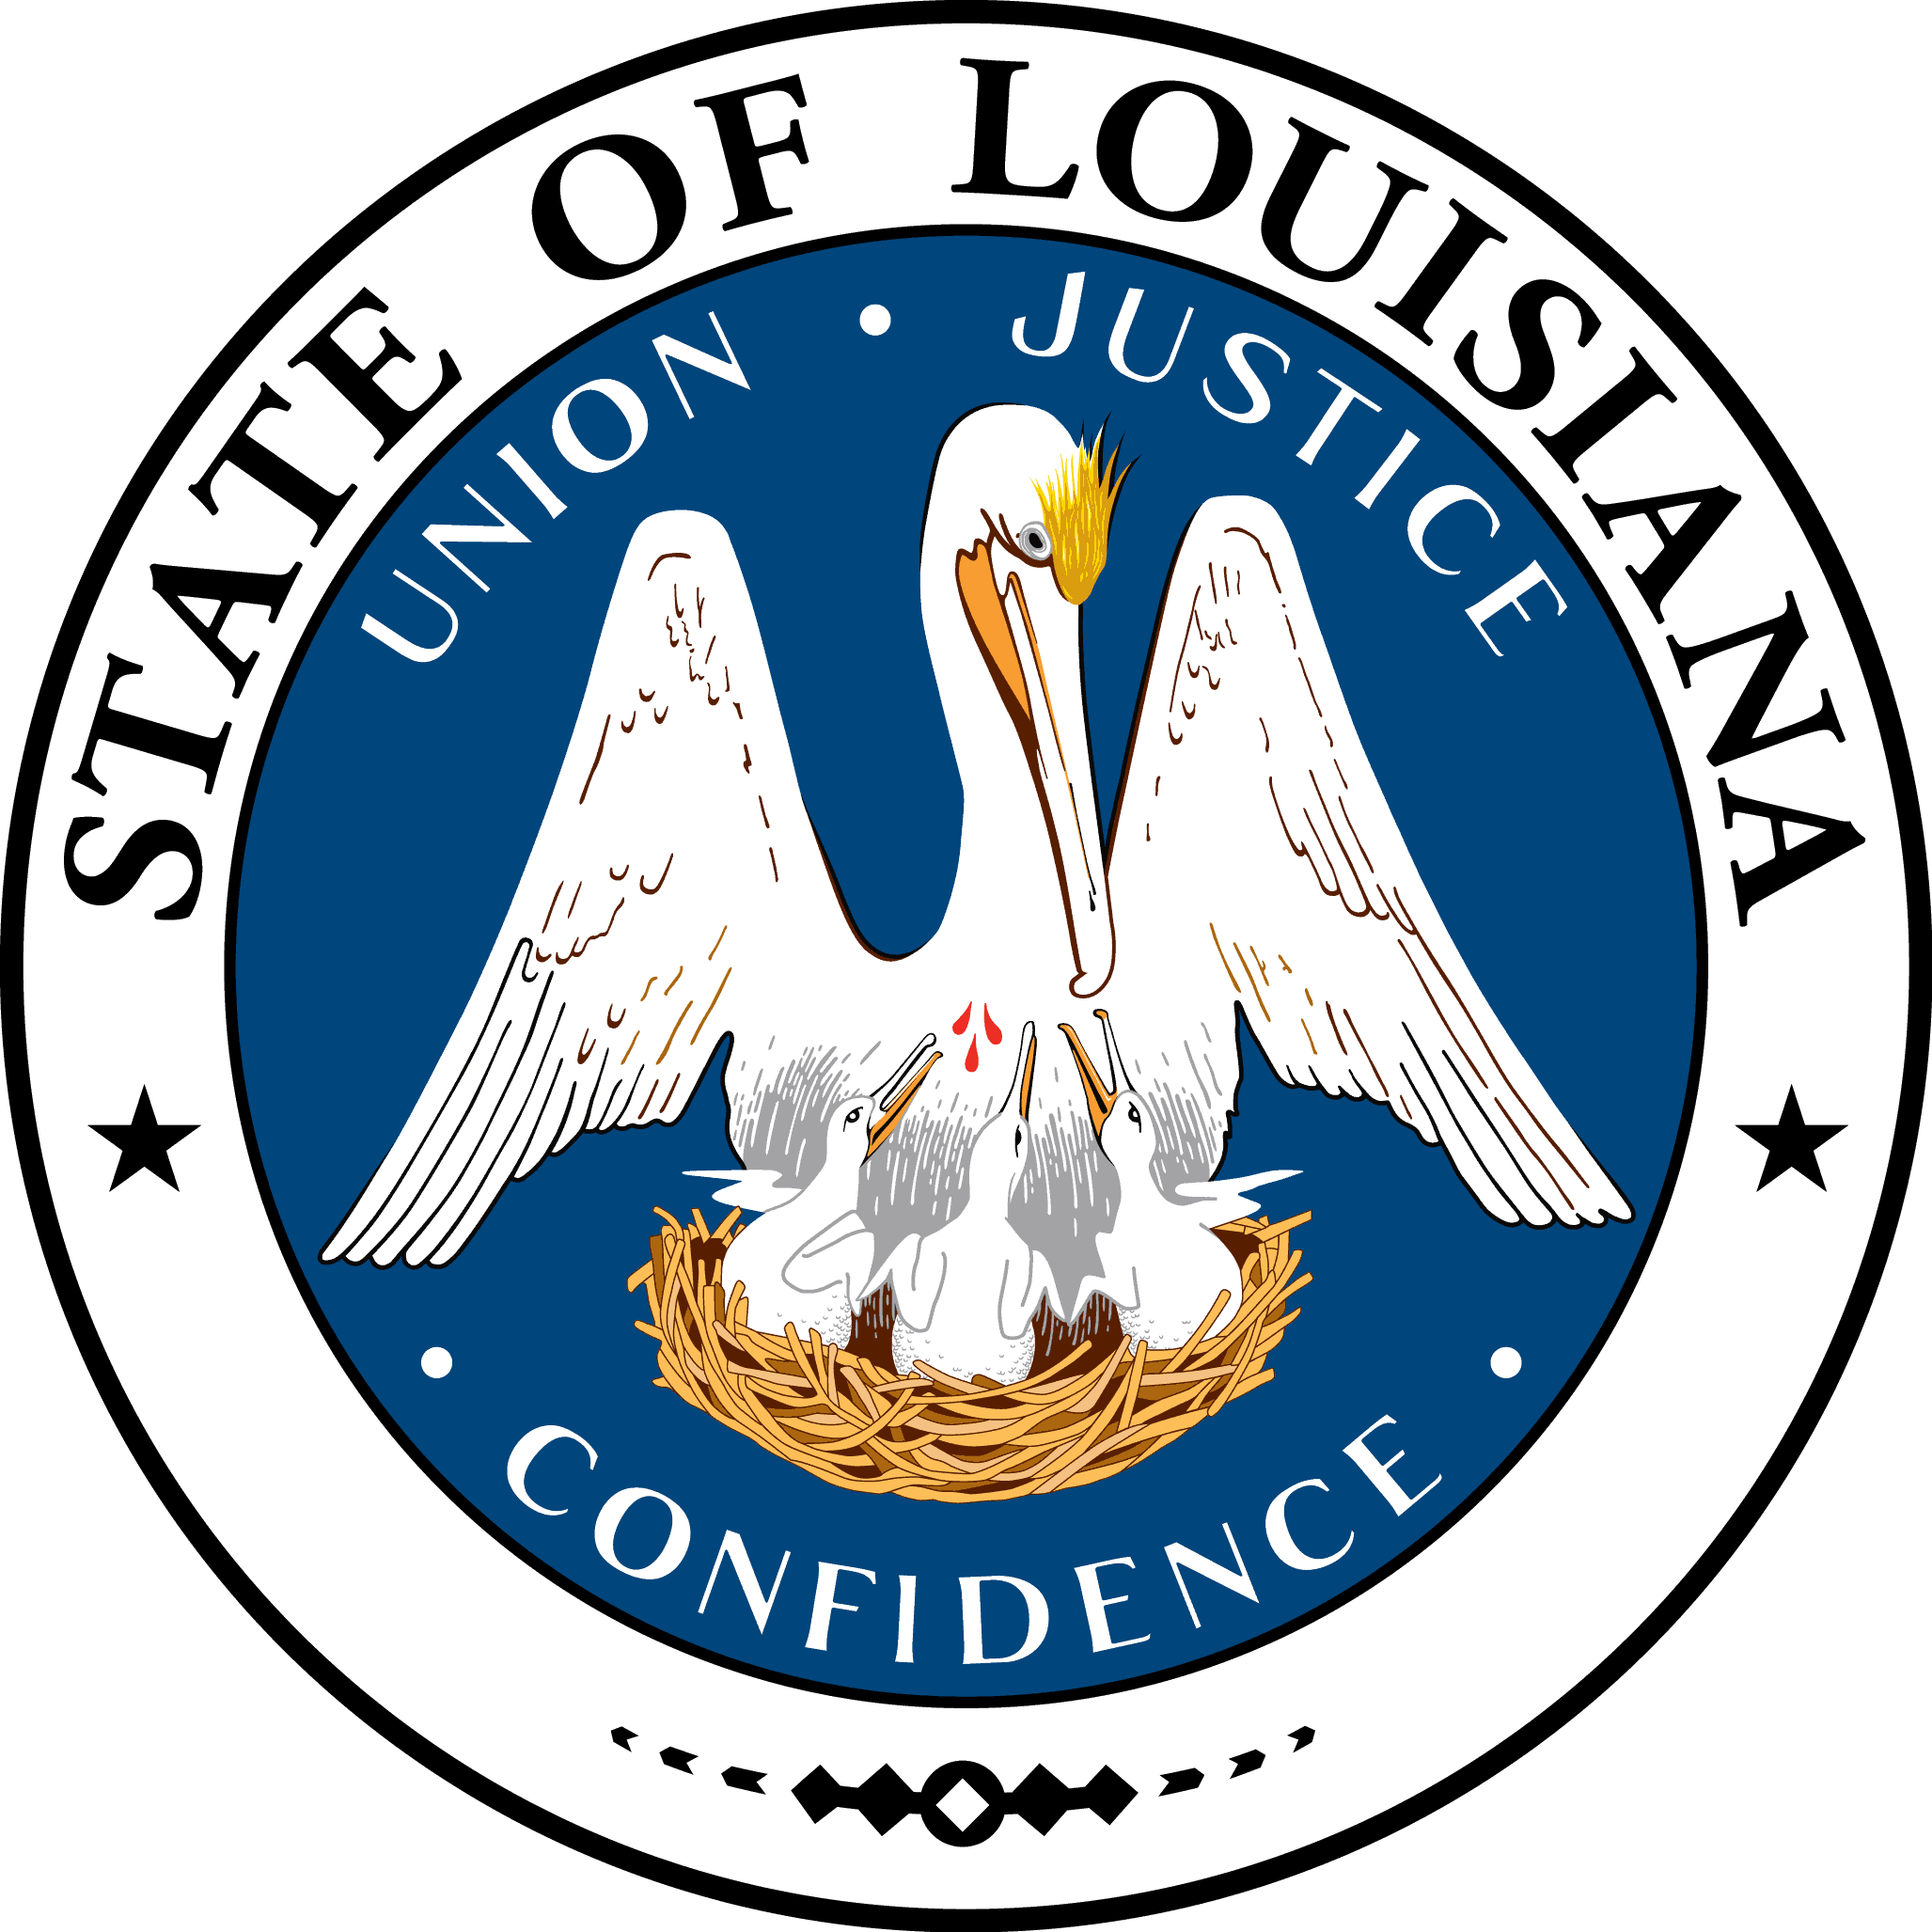 The state seal of Louisiana, depicting a pelican feeding her chicks